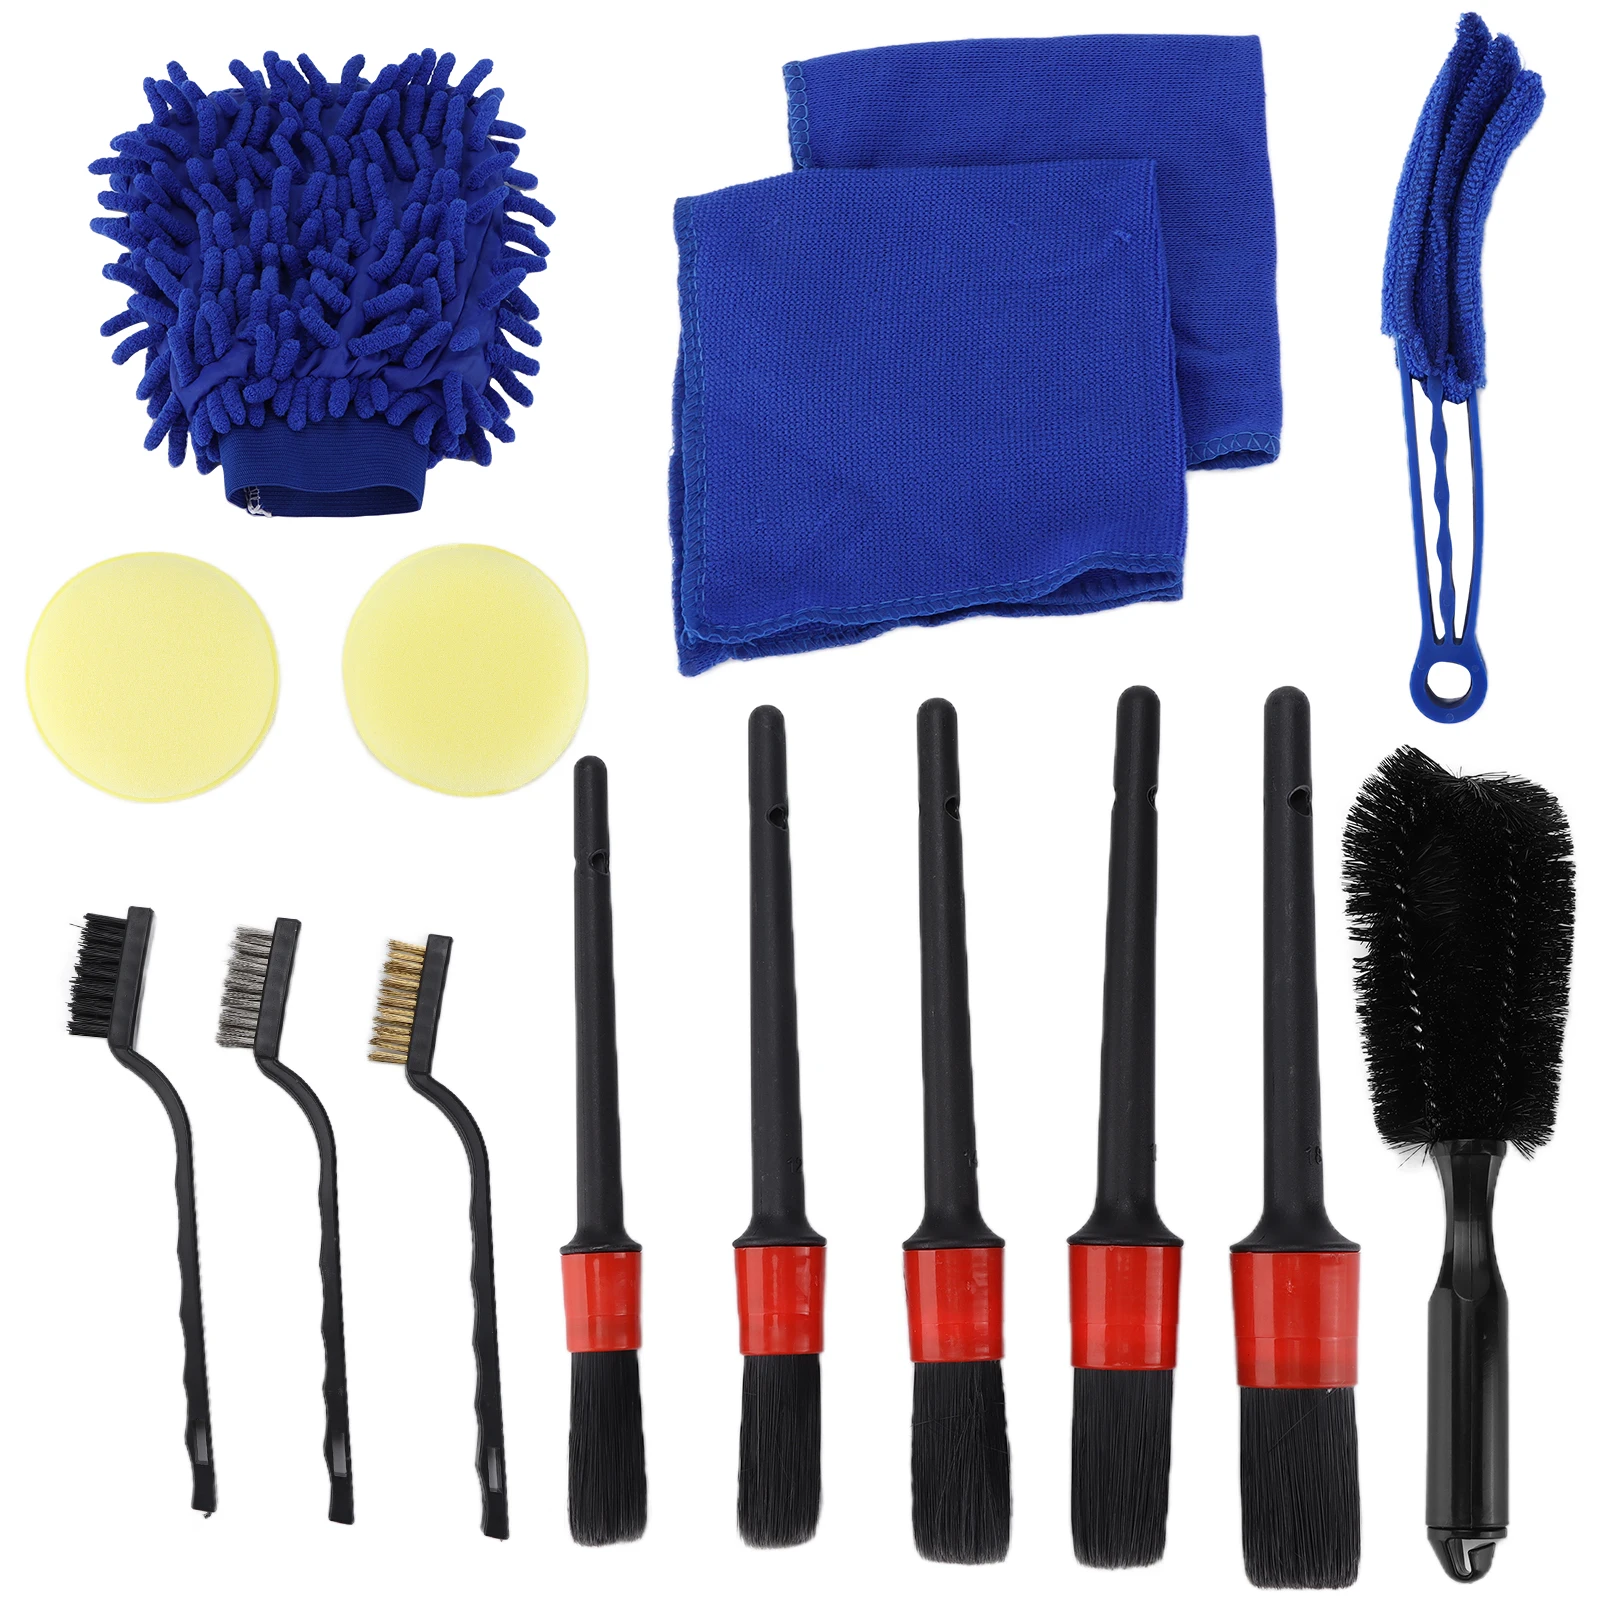 

15pcs Detailing Dusting Brushes Kit Scrub Cleaning Tool for Car Interior Exterior Wheels Dashboard Air Vent